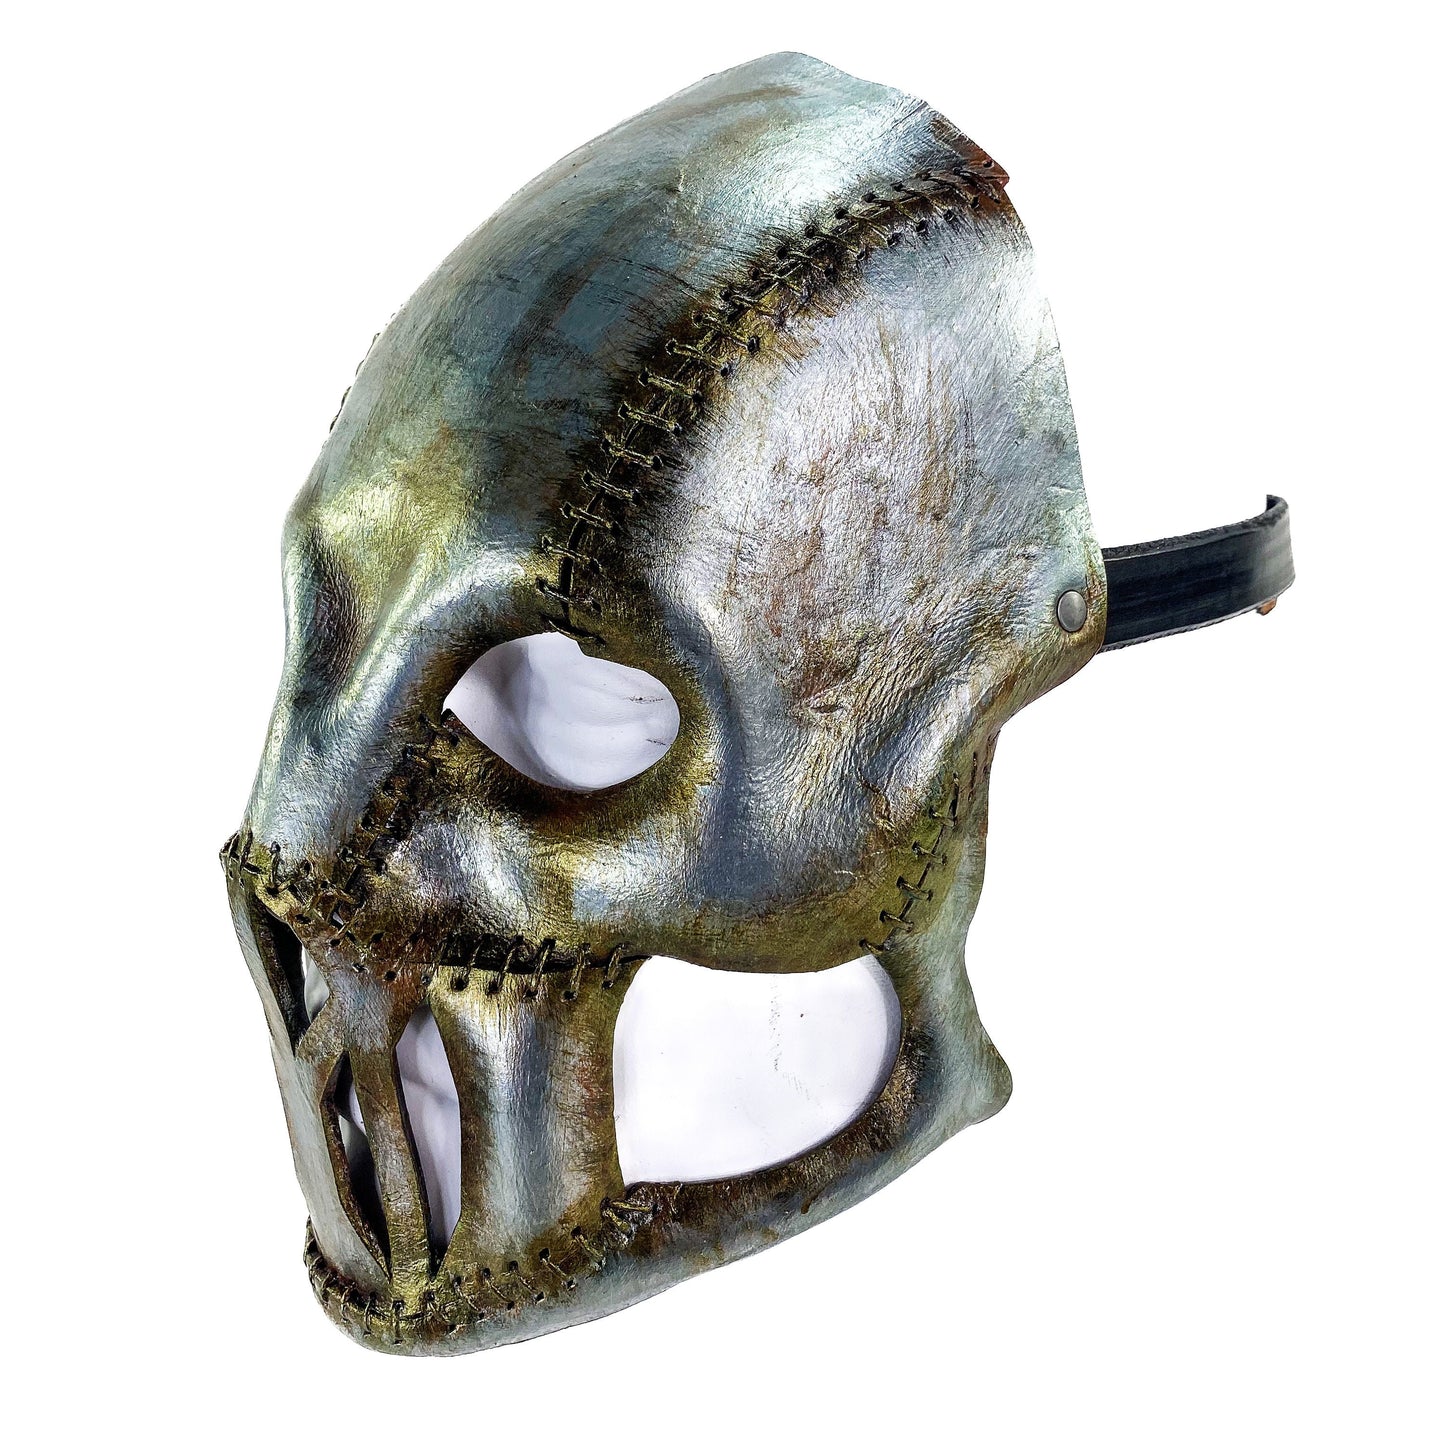 Invader - Genuine Leather Mask in Corroded Metallic Paint - Handmade Full Face Cover for Halloween, Performance or Cosplay